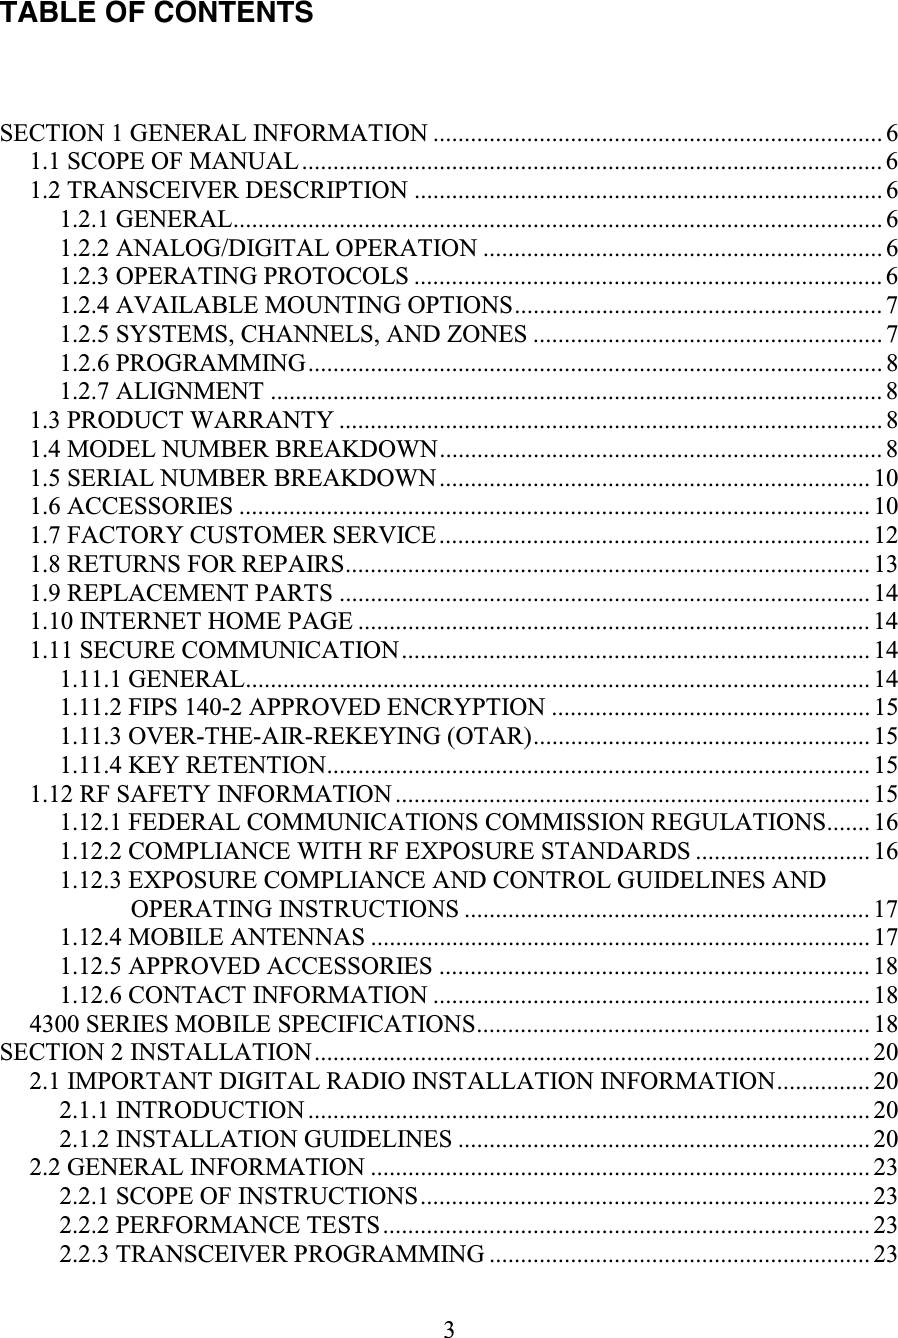 3     TABLE OF CONTENTS  SECTION 1 GENERAL INFORMATION ........................................................................ 6 1.1 SCOPE OF MANUAL............................................................................................. 6 1.2 TRANSCEIVER DESCRIPTION ........................................................................... 6 1.2.1 GENERAL........................................................................................................ 6 1.2.2 ANALOG/DIGITAL OPERATION ................................................................ 6 1.2.3 OPERATING PROTOCOLS ........................................................................... 6 1.2.4 AVAILABLE MOUNTING OPTIONS........................................................... 7 1.2.5 SYSTEMS, CHANNELS, AND ZONES ........................................................ 7 1.2.6 PROGRAMMING............................................................................................ 8 1.2.7 ALIGNMENT .................................................................................................. 8 1.3 PRODUCT WARRANTY ....................................................................................... 8 1.4 MODEL NUMBER BREAKDOWN....................................................................... 8 1.5 SERIAL NUMBER BREAKDOWN..................................................................... 10 1.6 ACCESSORIES ..................................................................................................... 10 1.7 FACTORY CUSTOMER SERVICE..................................................................... 12 1.8 RETURNS FOR REPAIRS.................................................................................... 13 1.9 REPLACEMENT PARTS ..................................................................................... 14 1.10 INTERNET HOME PAGE .................................................................................. 14 1.11 SECURE COMMUNICATION........................................................................... 14 1.11.1 GENERAL.................................................................................................... 14 1.11.2 FIPS 140-2 APPROVED ENCRYPTION ................................................... 15 1.11.3 OVER-THE-AIR-REKEYING (OTAR)...................................................... 15 1.11.4 KEY RETENTION....................................................................................... 15 1.12 RF SAFETY INFORMATION ............................................................................ 15 1.12.1 FEDERAL COMMUNICATIONS COMMISSION REGULATIONS....... 16 1.12.2 COMPLIANCE WITH RF EXPOSURE STANDARDS ............................ 16 1.12.3 EXPOSURE COMPLIANCE AND CONTROL GUIDELINES AND OPERATING INSTRUCTIONS ................................................................. 17 1.12.4 MOBILE ANTENNAS ................................................................................ 17 1.12.5 APPROVED ACCESSORIES ..................................................................... 18 1.12.6 CONTACT INFORMATION ...................................................................... 18 4300 SERIES MOBILE SPECIFICATIONS............................................................... 18 SECTION 2 INSTALLATION......................................................................................... 20 2.1 IMPORTANT DIGITAL RADIO INSTALLATION INFORMATION...............20 2.1.1 INTRODUCTION .......................................................................................... 20 2.1.2 INSTALLATION GUIDELINES .................................................................. 20 2.2 GENERAL INFORMATION ................................................................................ 23 2.2.1 SCOPE OF INSTRUCTIONS........................................................................ 23 2.2.2 PERFORMANCE TESTS..............................................................................23 2.2.3 TRANSCEIVER PROGRAMMING ............................................................. 23 